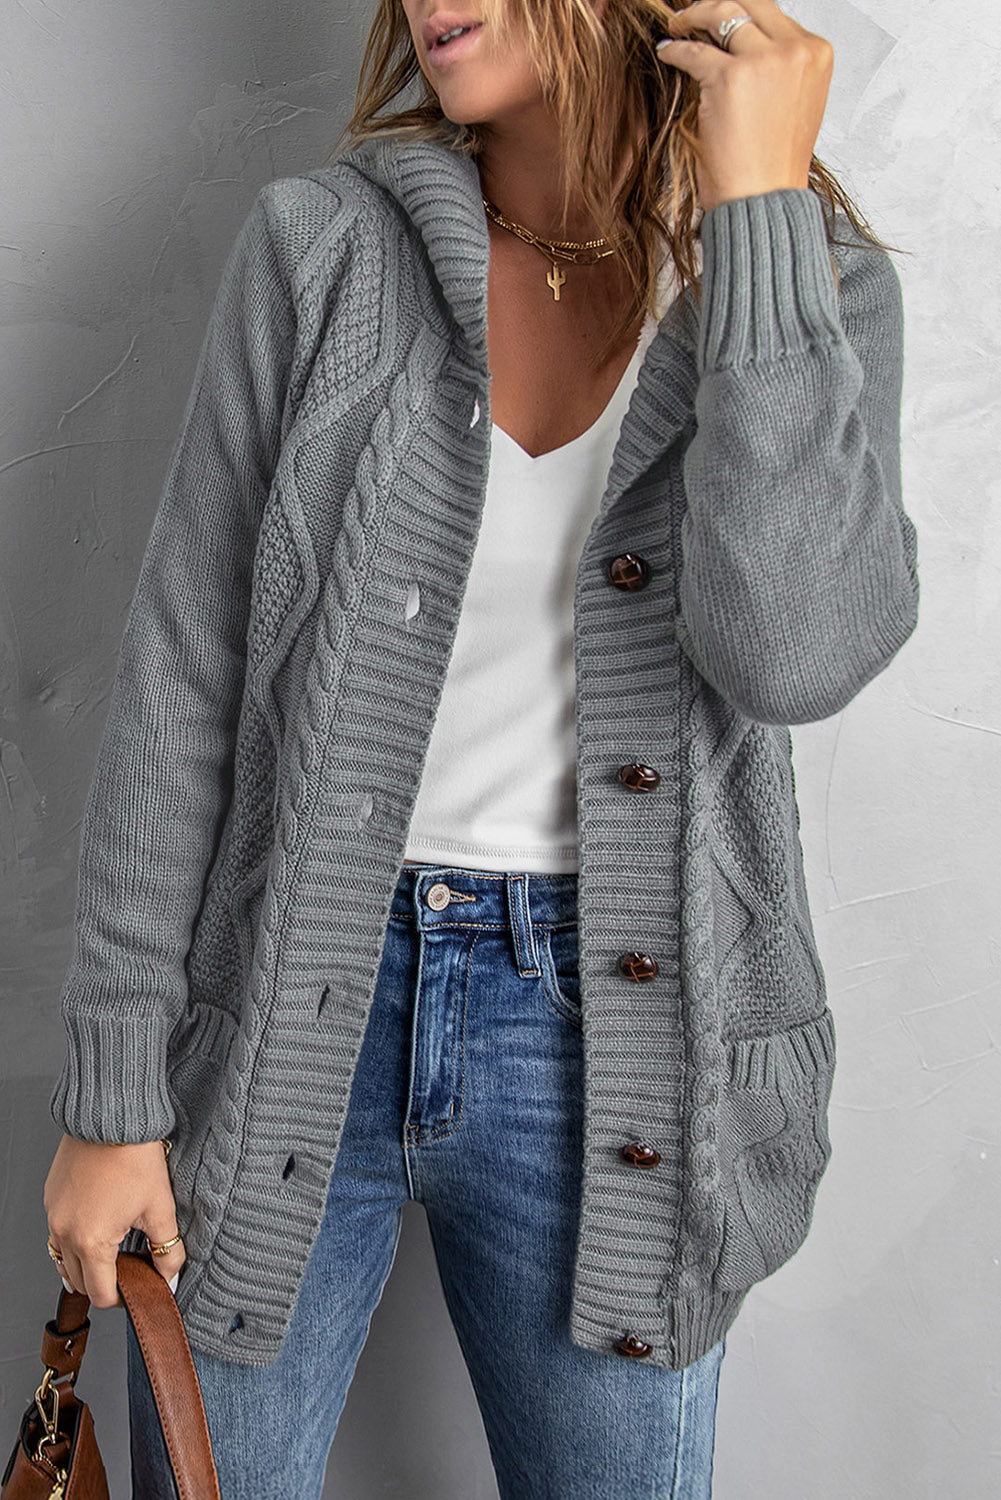 Mabel Knitted Cardigan